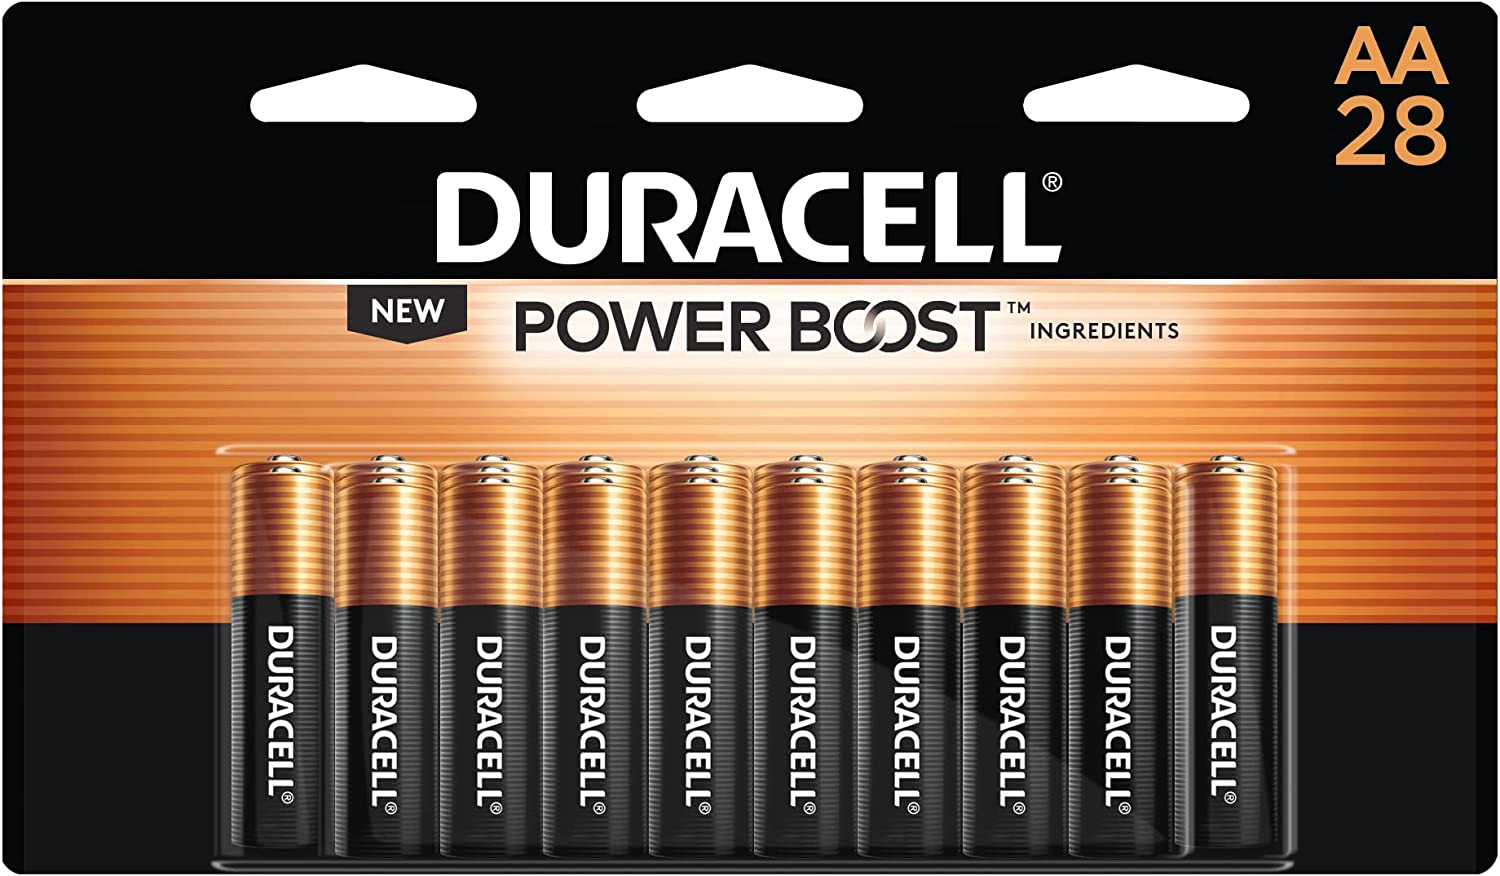 Duracell CR2032 3V Lithium Battery, Child Safety Features, 12